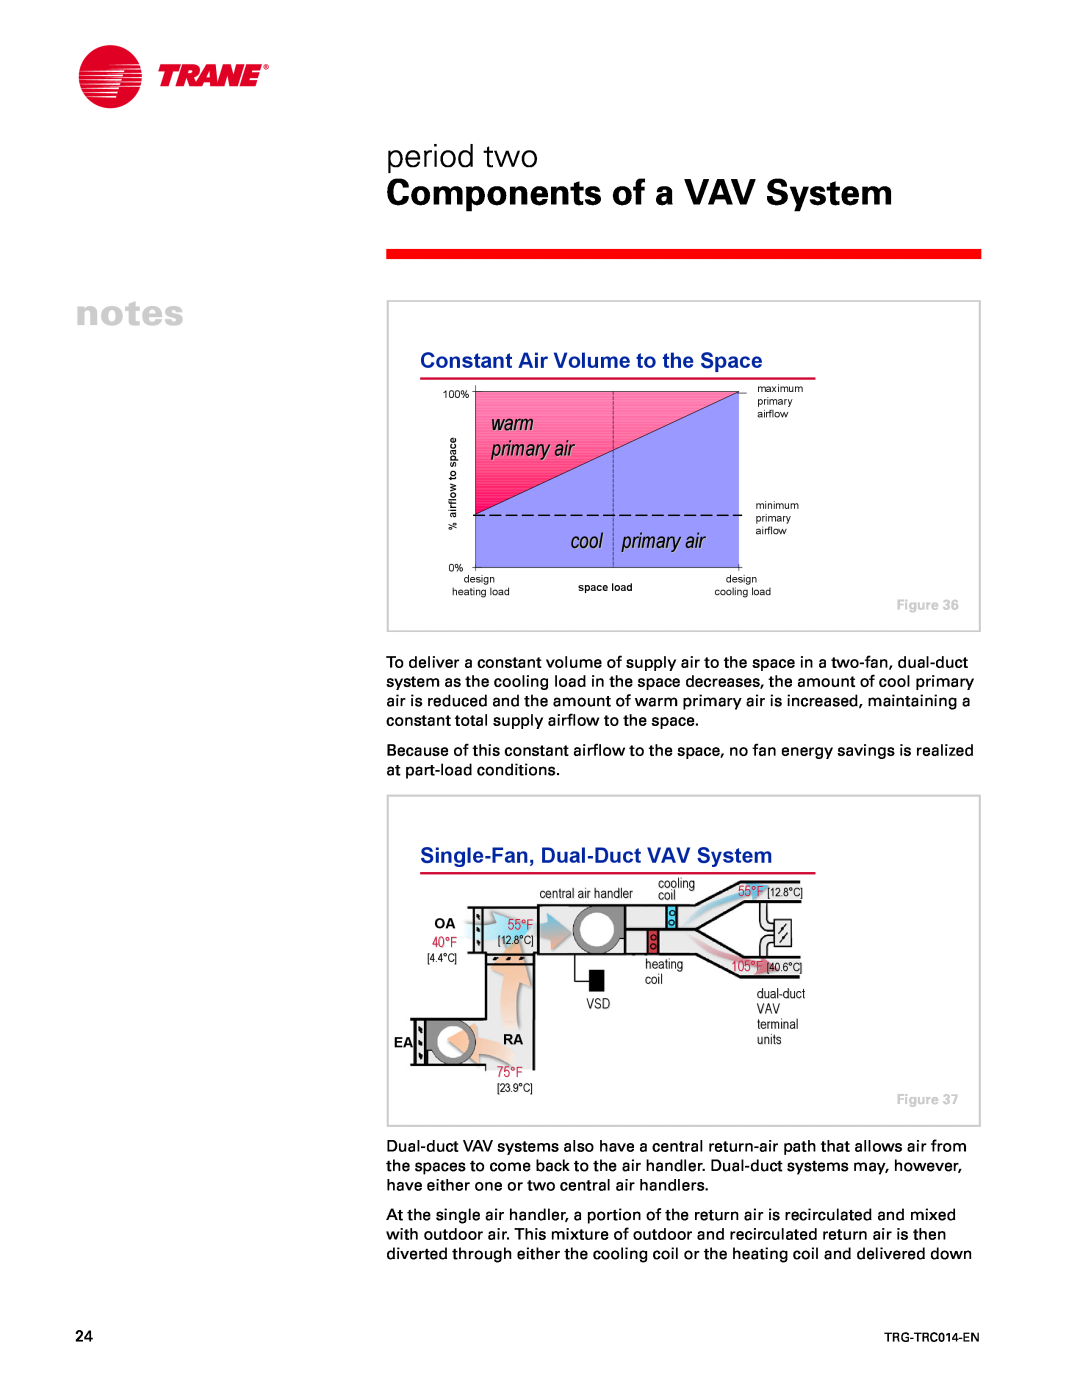 Trane TRG-TRC014-EN Constant Air Volume to the Space, Single-Fan, Dual-DuctVAV System, Components of a VAV System, warm 